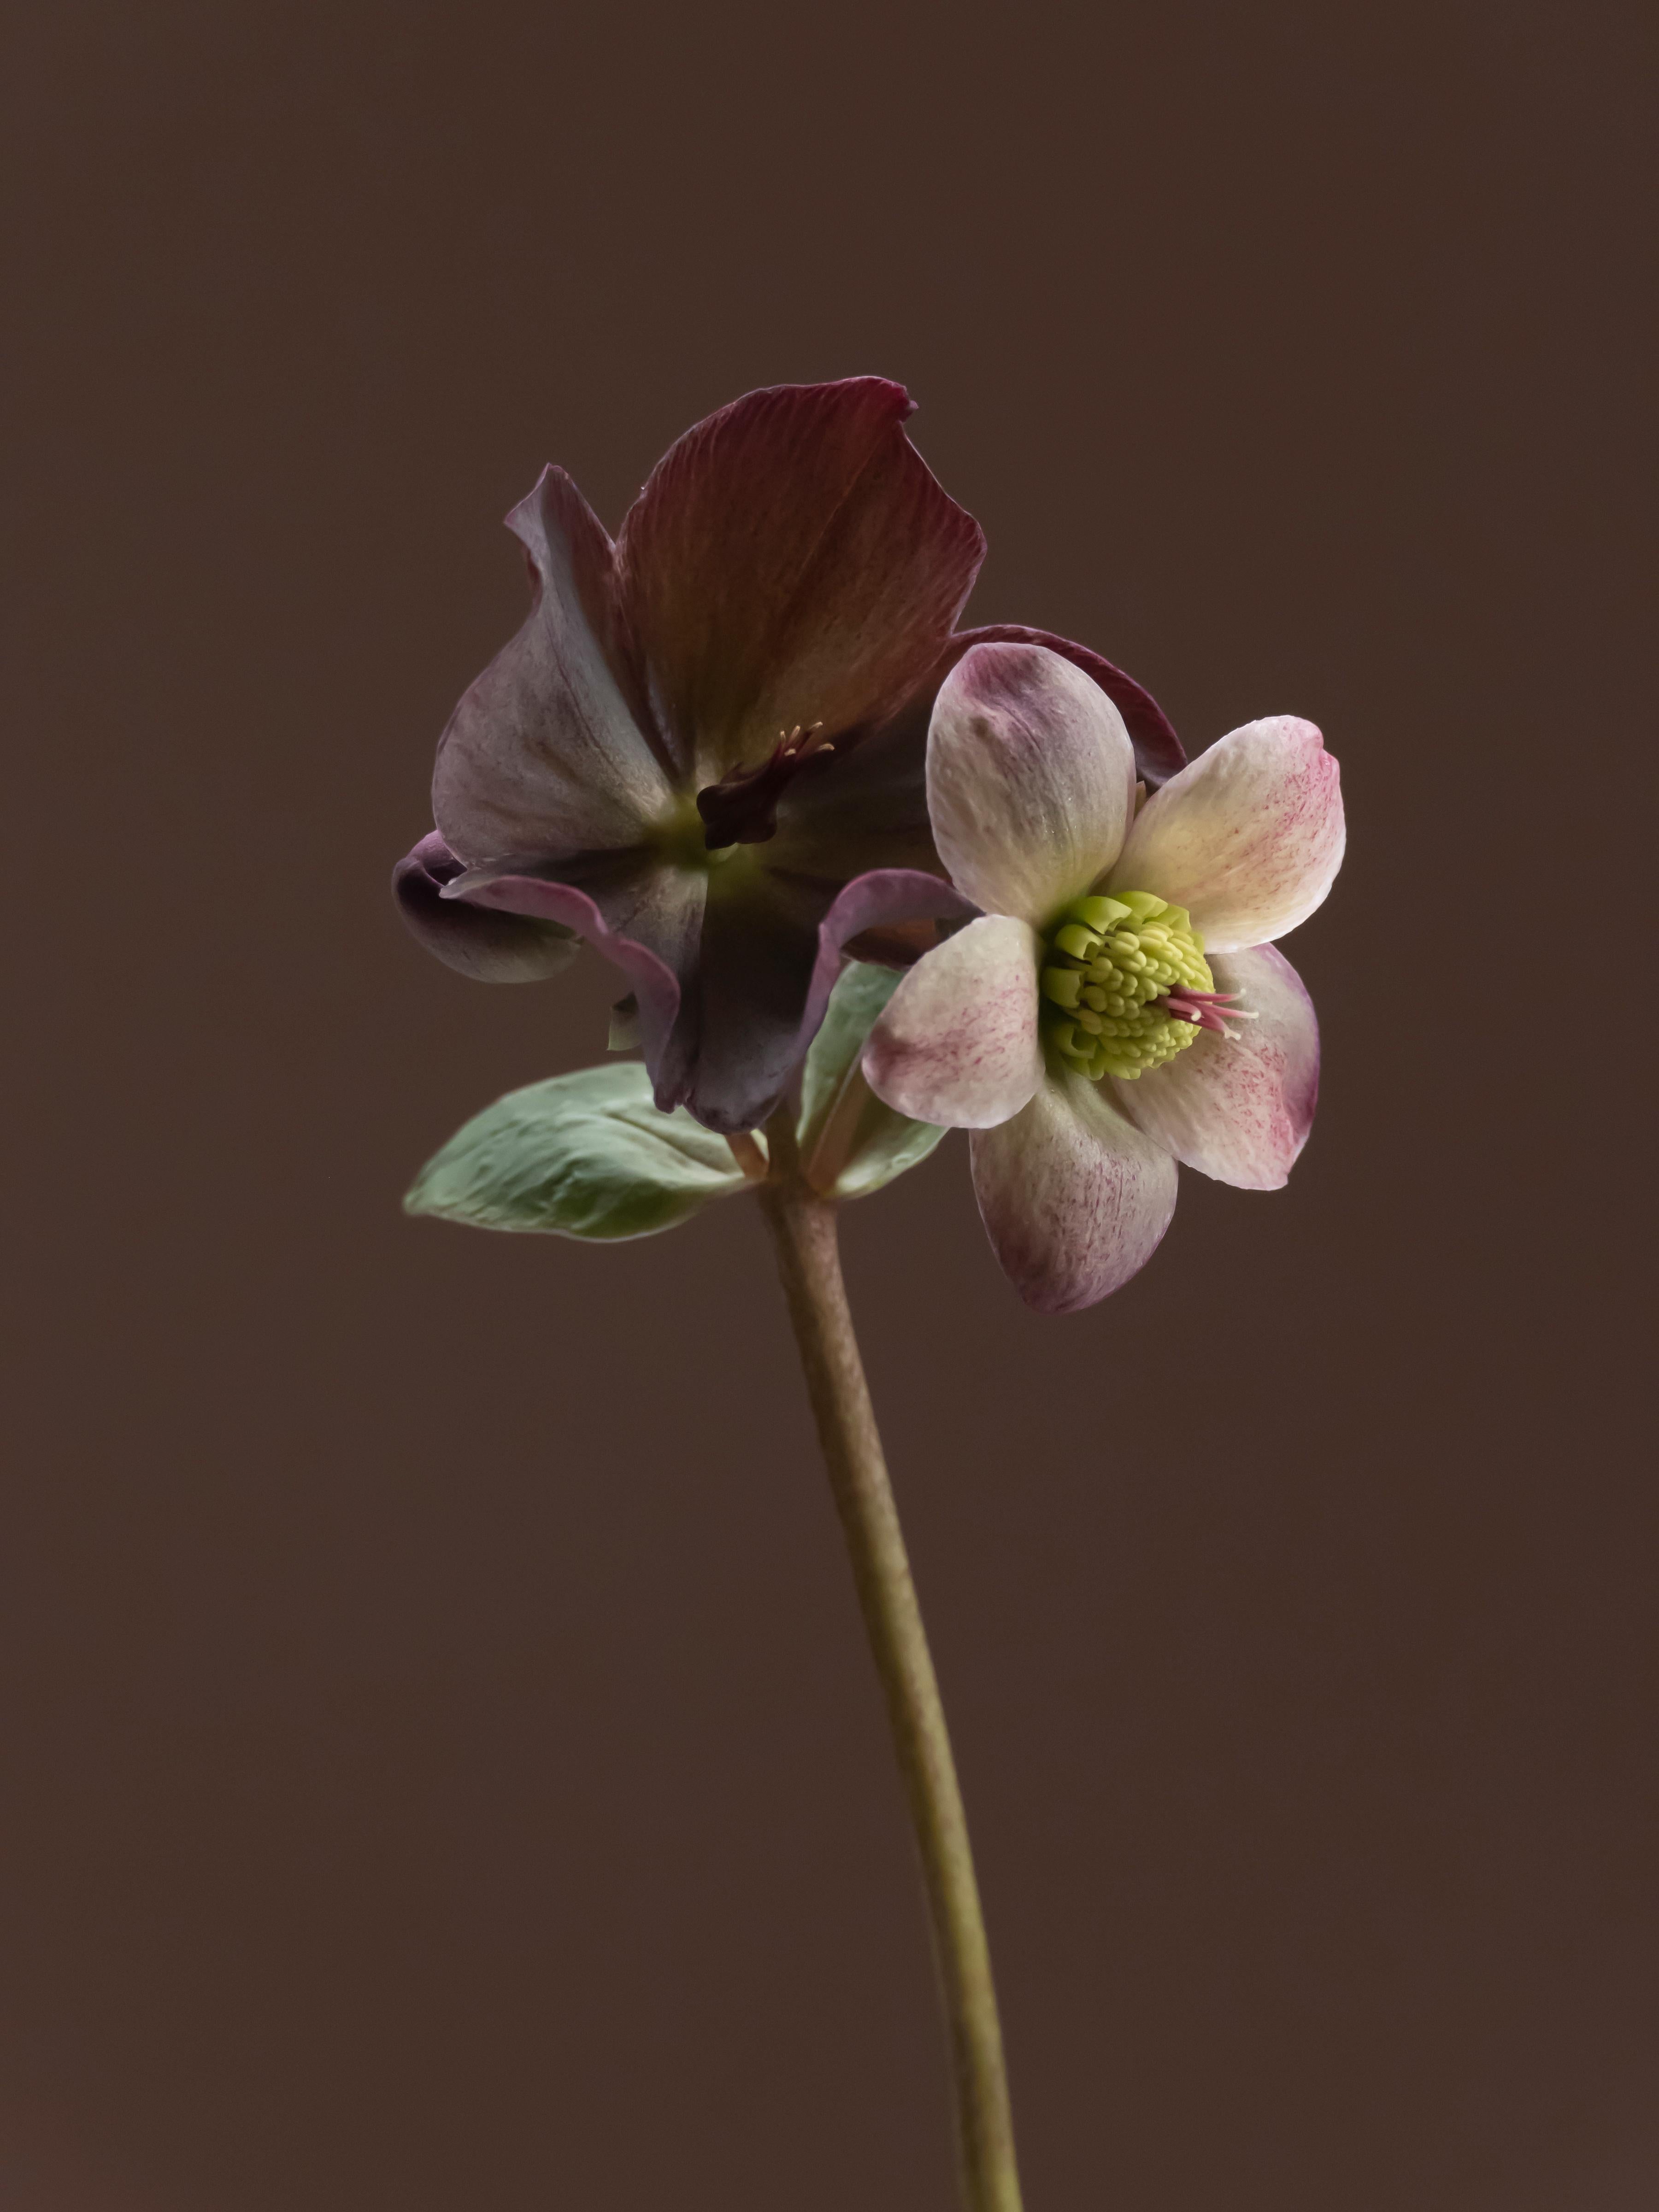 Anna Condo, a filmmaker and a photographer born in Armenia and raised in France, has been photographing flowers, her 